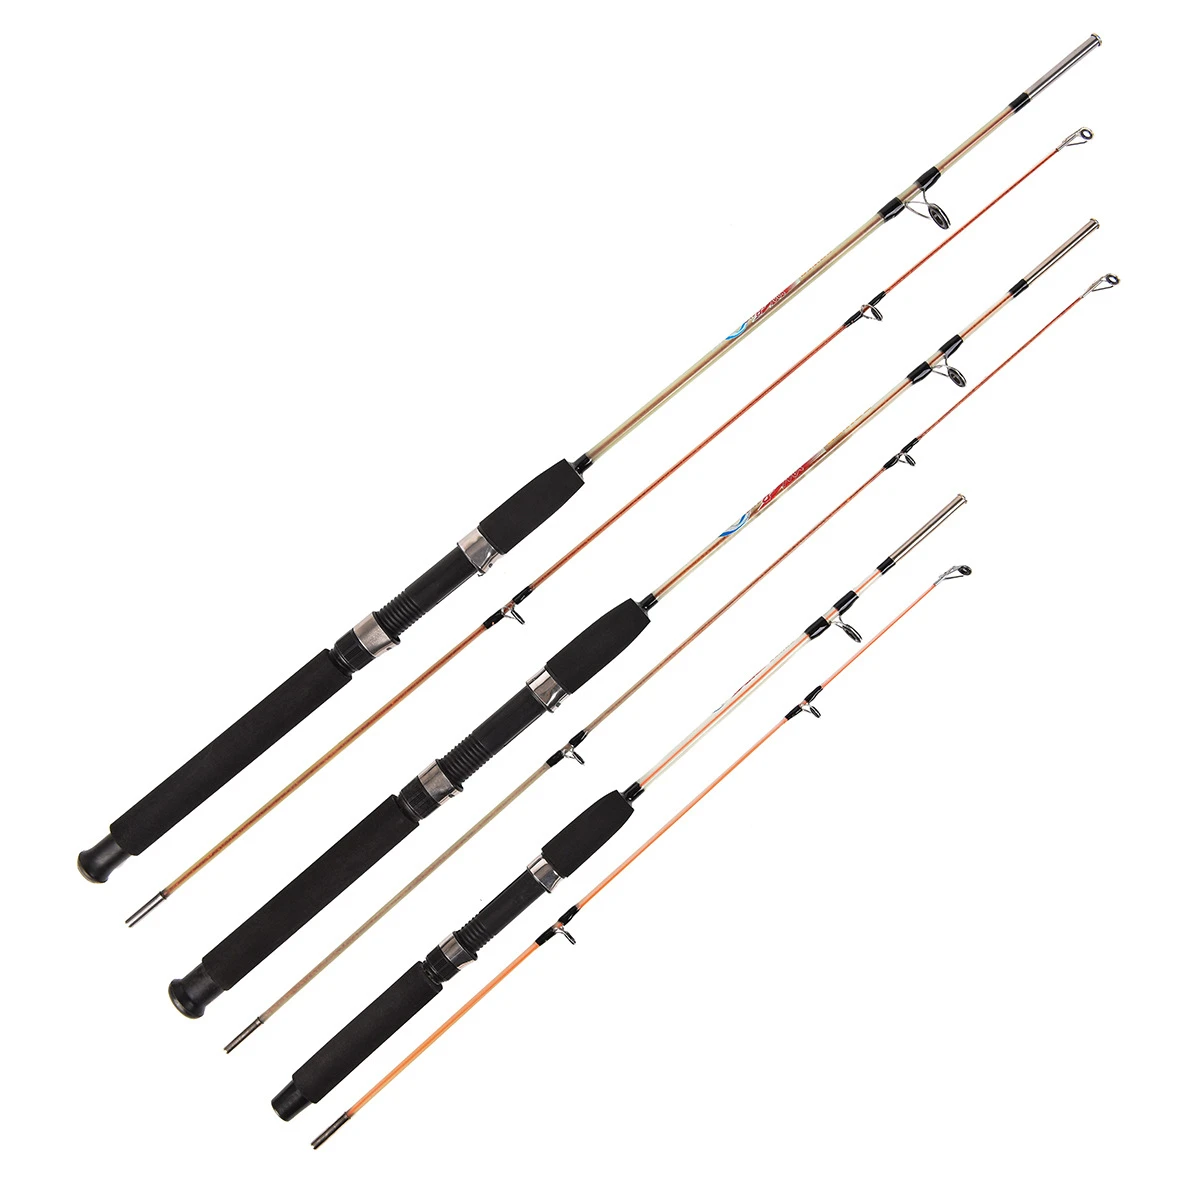 High Quality Transparent Fiberglass 2-section Lure Fishing Rod 1.1M and 1.5M Are Available Applicable To Various Fish and Places enlarge